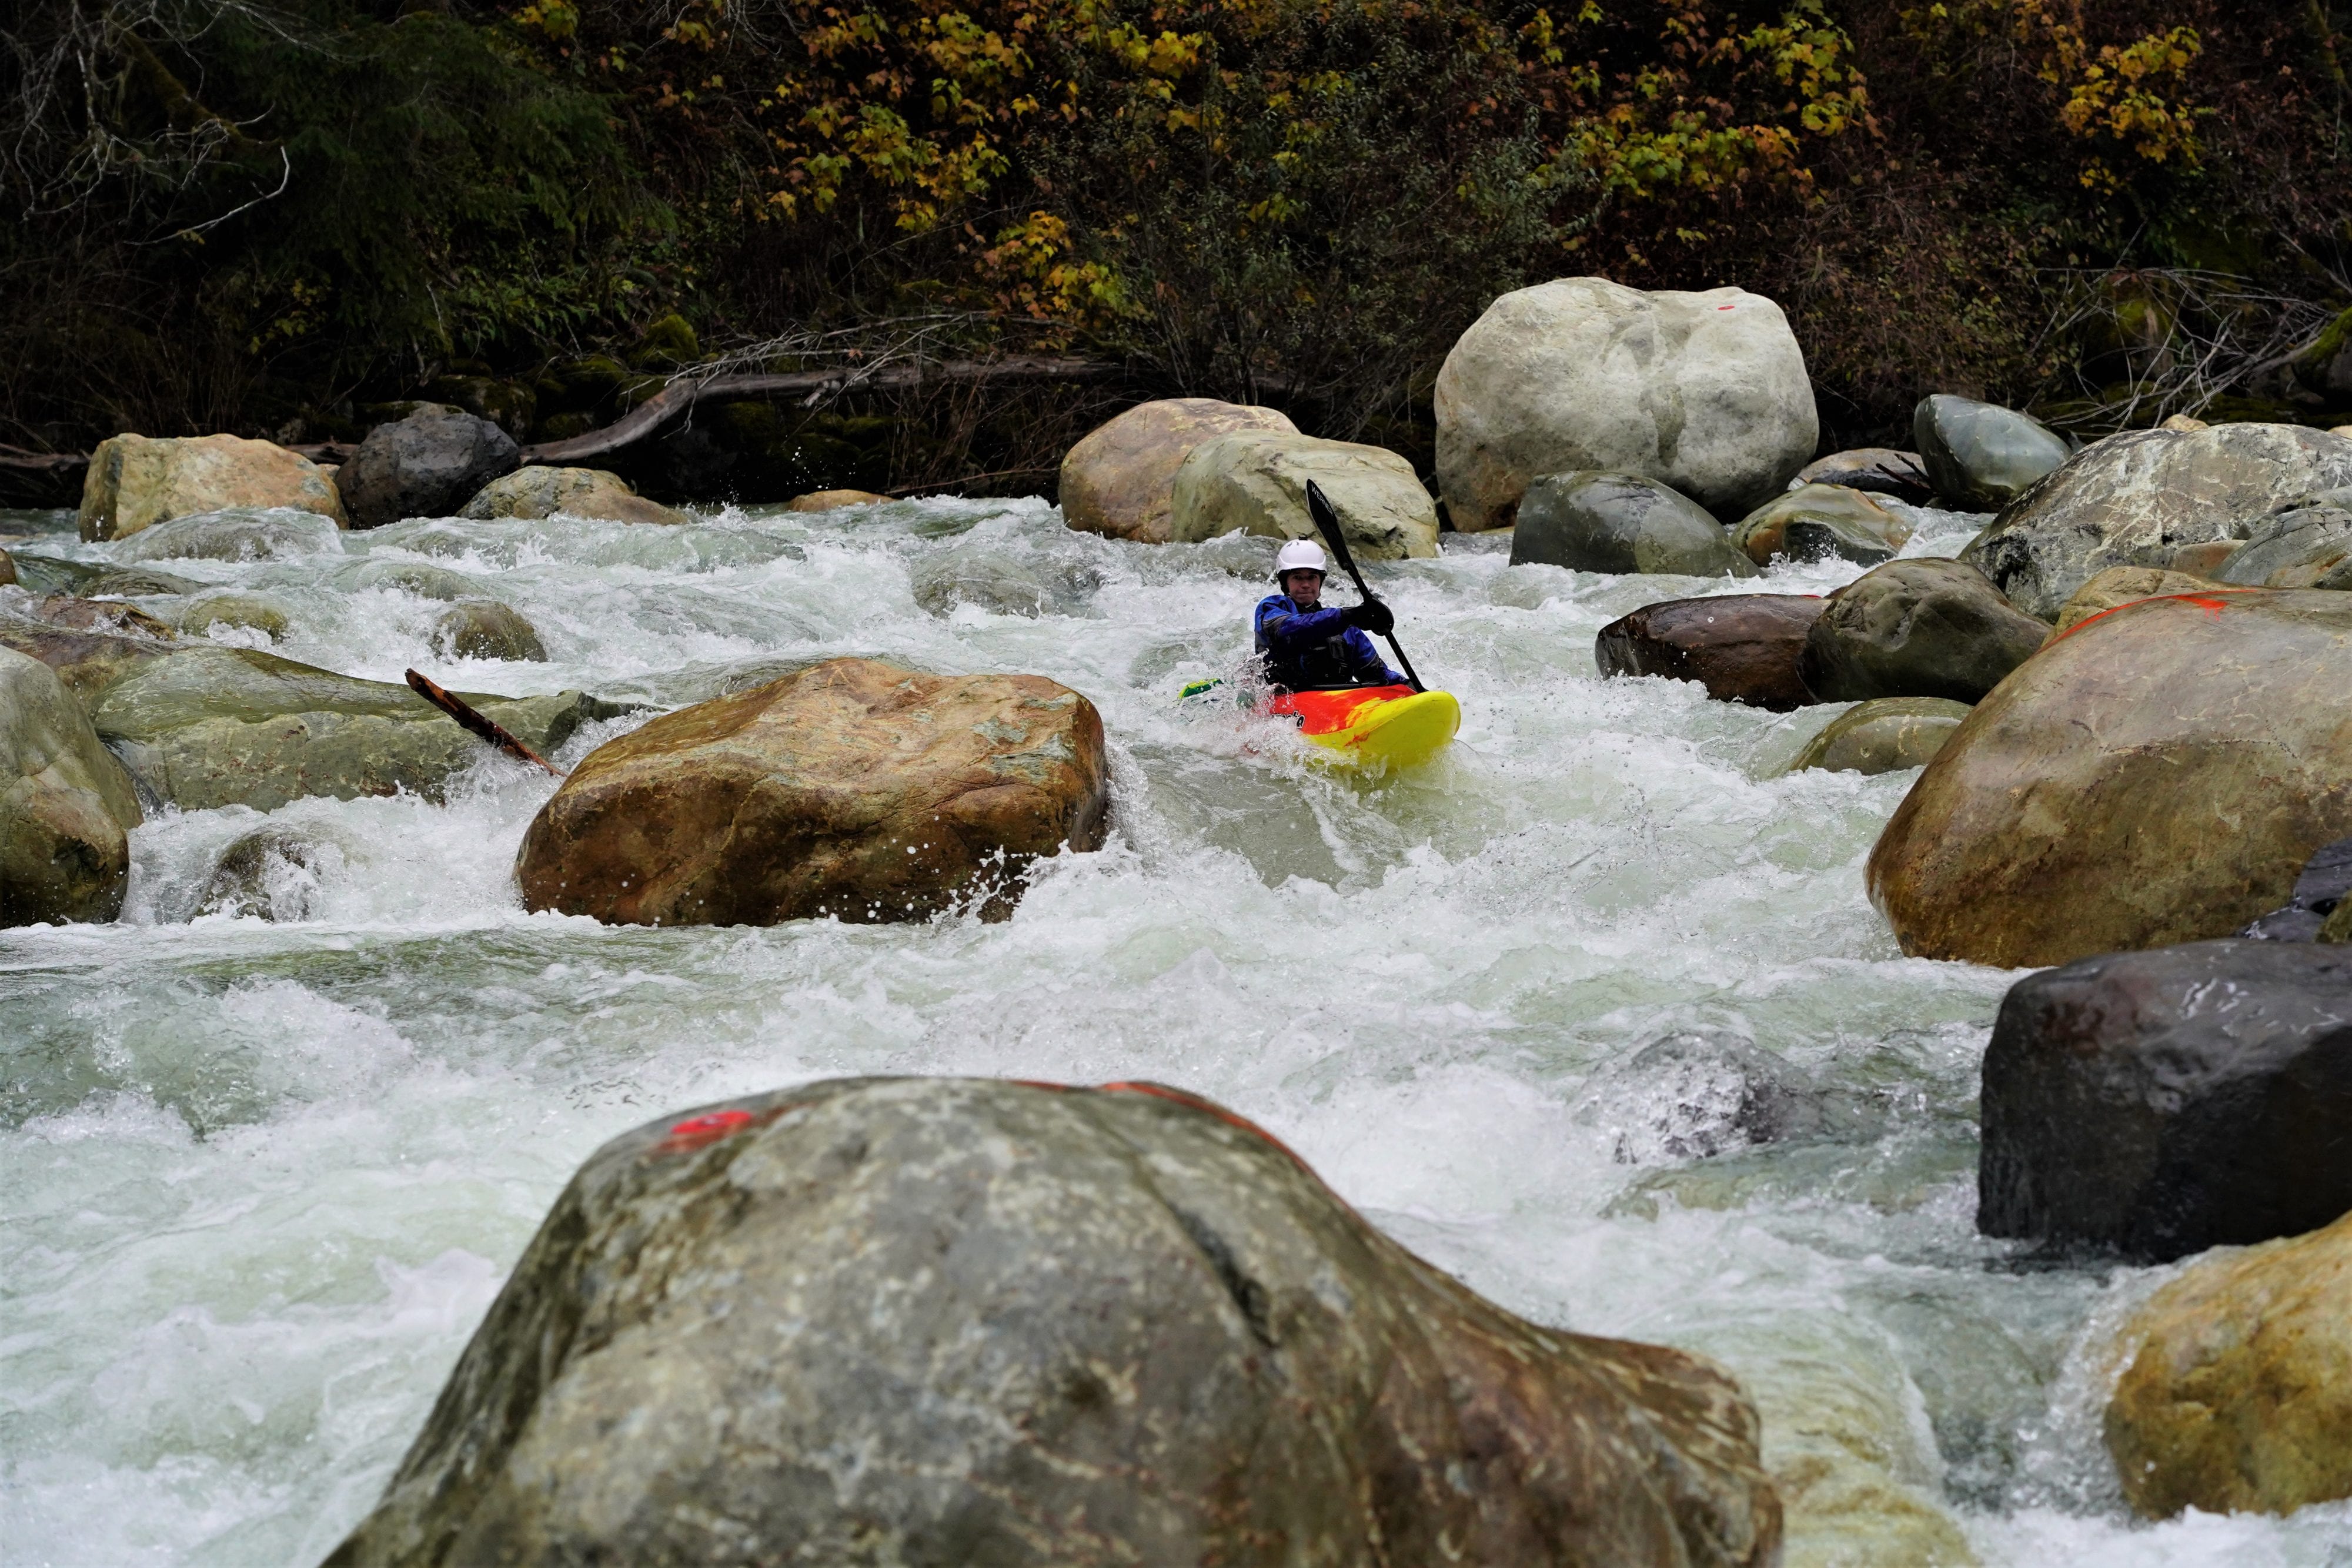 Kayaker in bright yellow and red kayak paddling through rapids in river